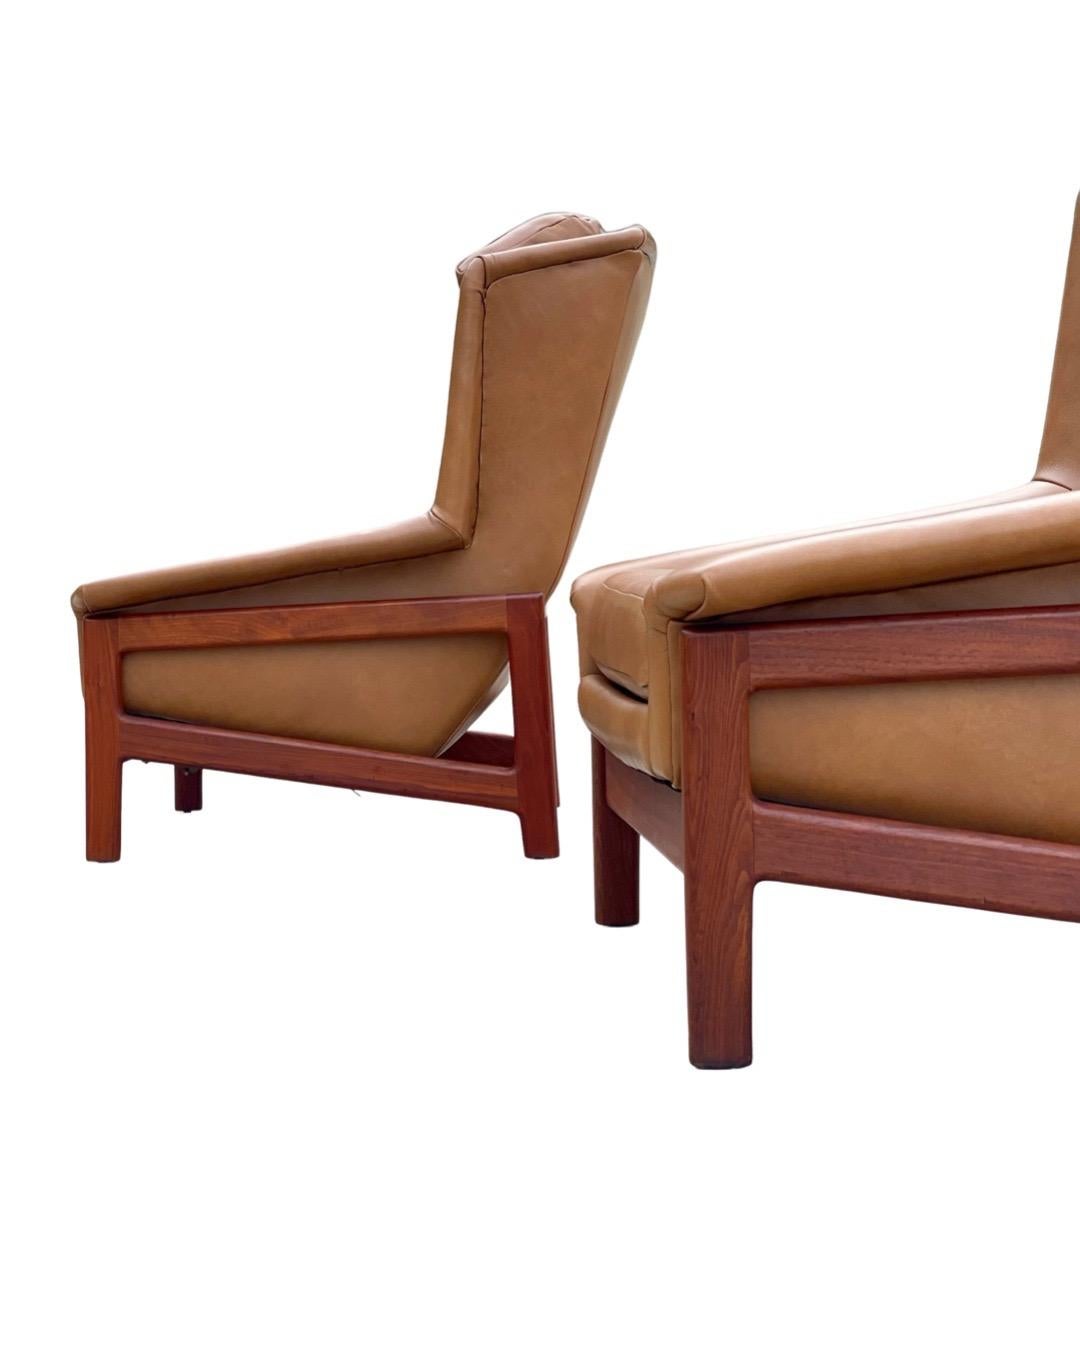 Midcentury Reclining Lounge Chairs in Leather + Walnut by Folke Ohlsson for DUX For Sale 8